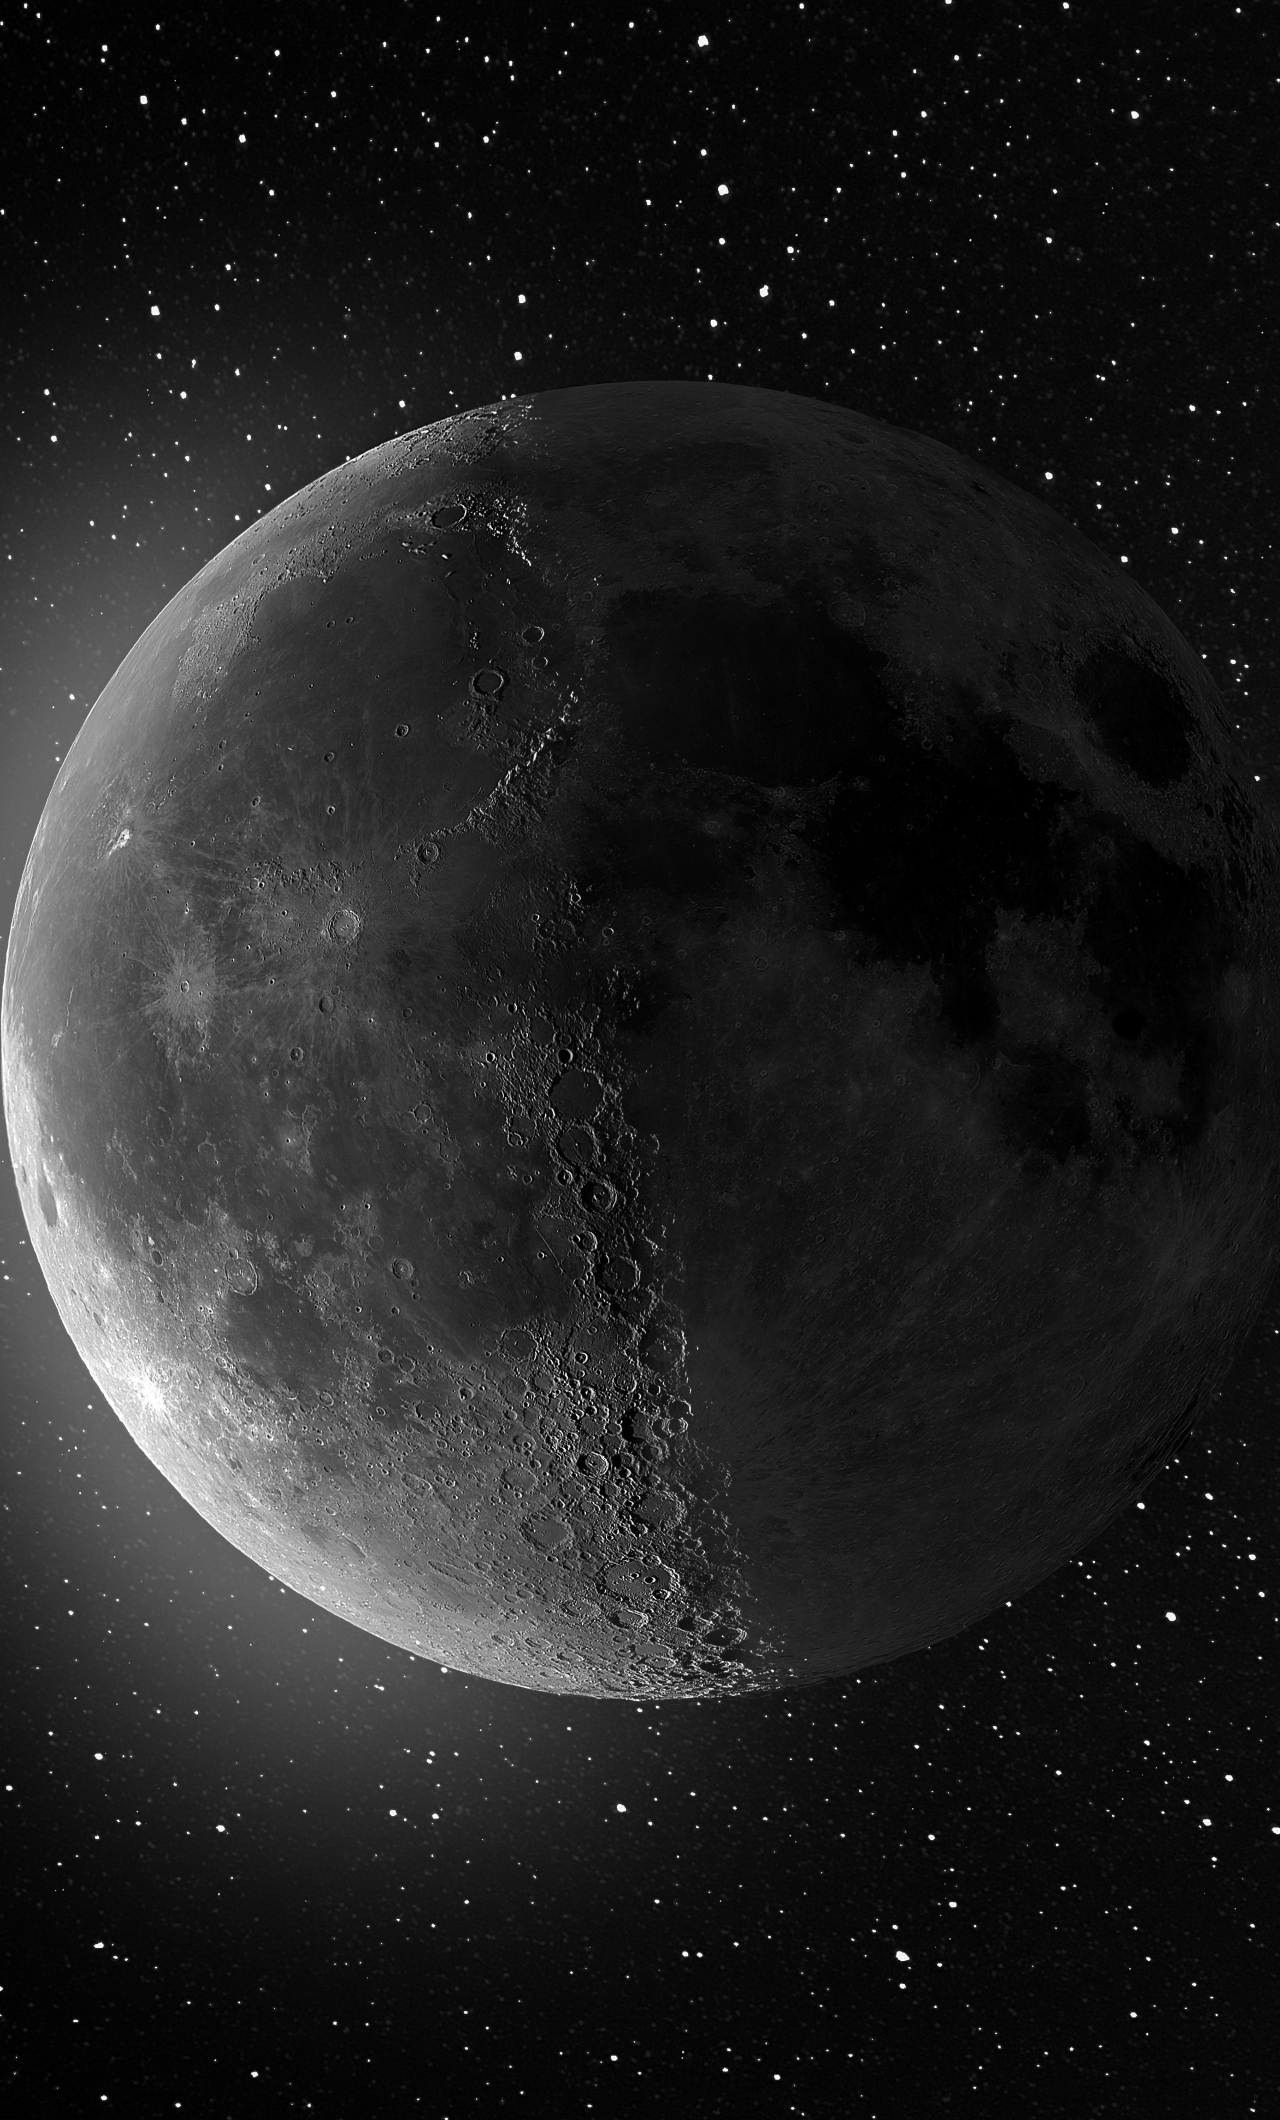 1280x2120 Moon From Space 4K iPhone 6 plus Wallpaper, HD Space 4K ...